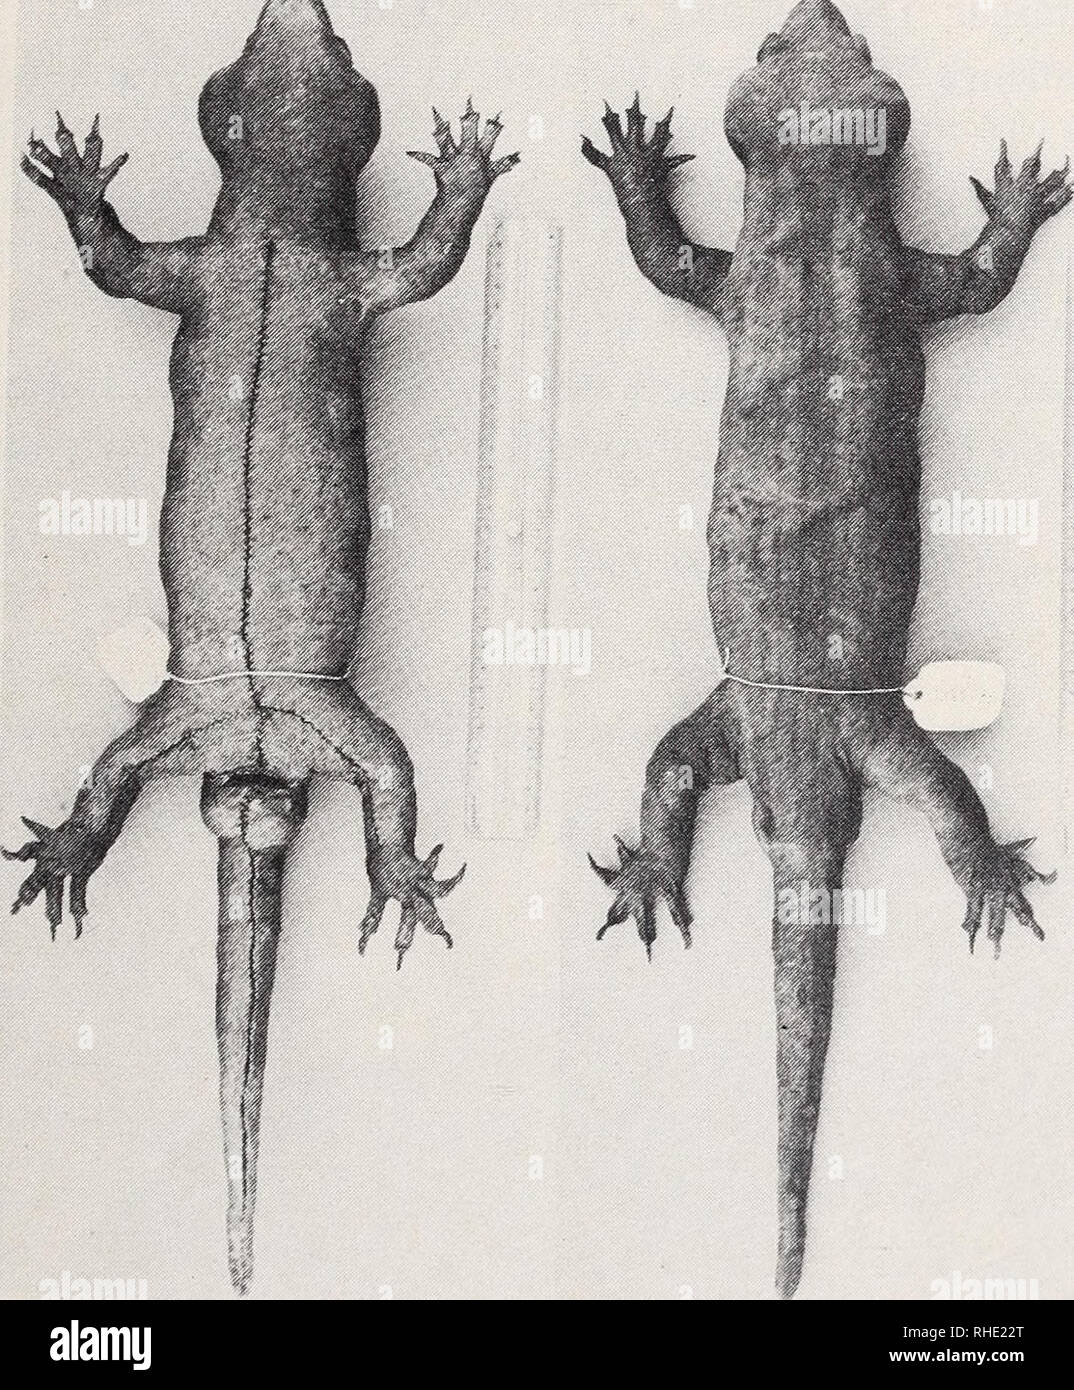 . Bonner zoologische Monographien. Zoology. 107 Hoplodactylus delcourti Bauer &amp; Russell, 1986 (Fig. 32) 1986 Hoplodactylus delcourti Bauer &amp; Russell. New Zealand J.Zool. 13:(141). Type locality: &quot;possibly the North Island, New Zealand&quot;. Holotype: MMNH 1985-38. 1988 Hoplodactylus delcorti Towns. A Field Guide to the Lizards of New Zealand: 6 (lapsus pro Hoplodactylus delcourti Bauer &amp; Russell, 1986). Diagnosis: Digits broadly dilated, scansorial; terminal scansors present on digit one only; rostral contacts nostril; proximal portion of toe approximately three times width o Stock Photo